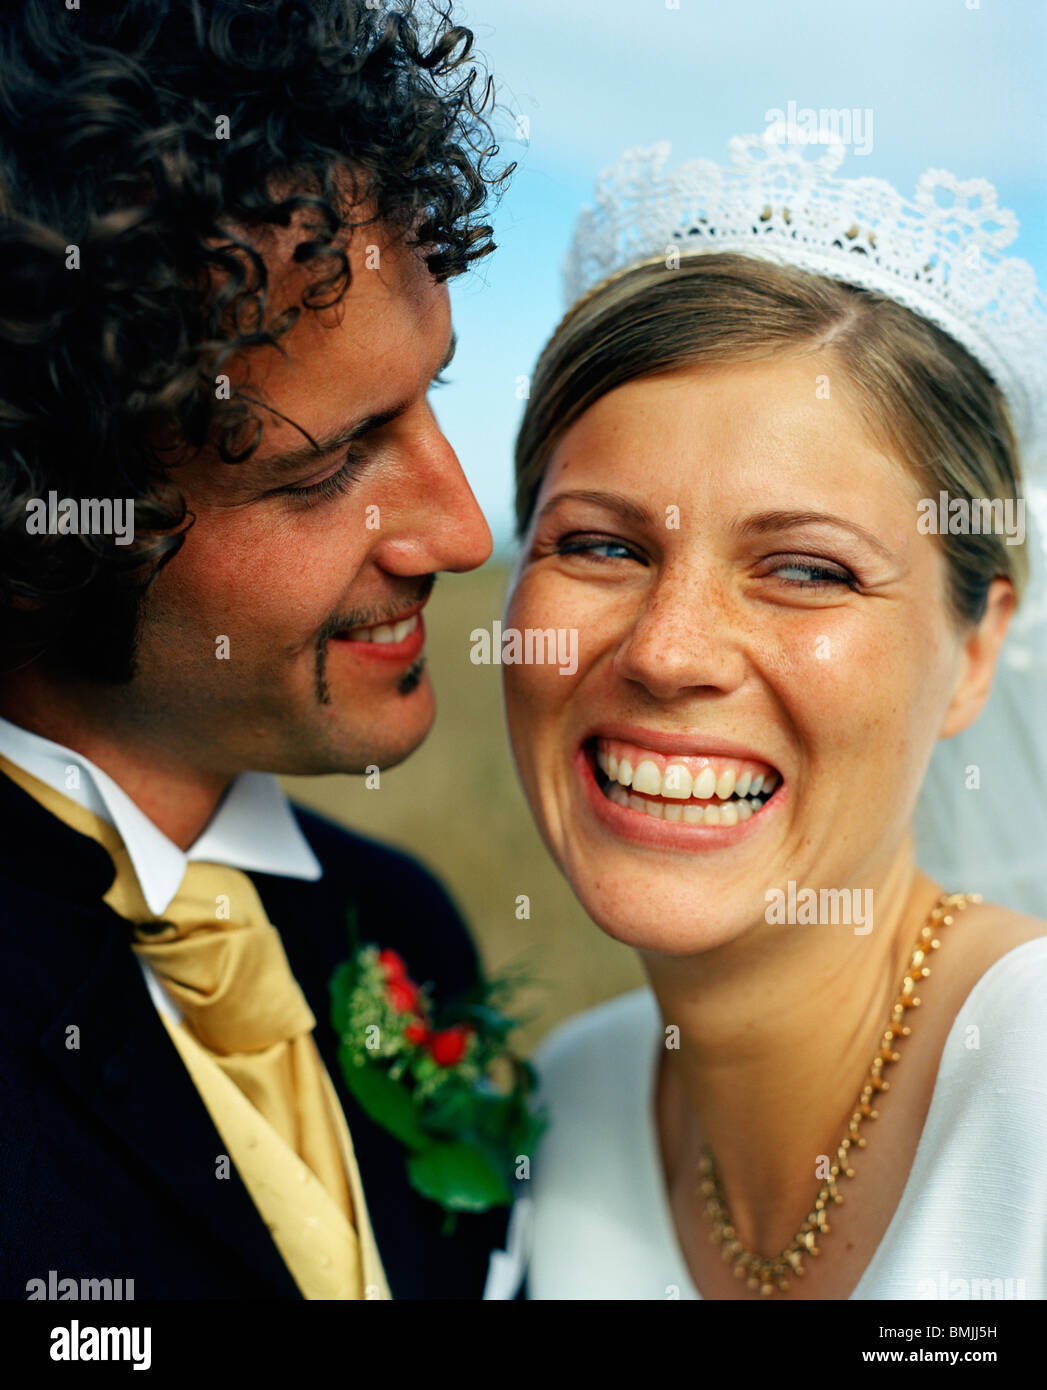 Scandinavia, Sweden, Oland, Groom looking at bride smiling, close-up Stock Photo